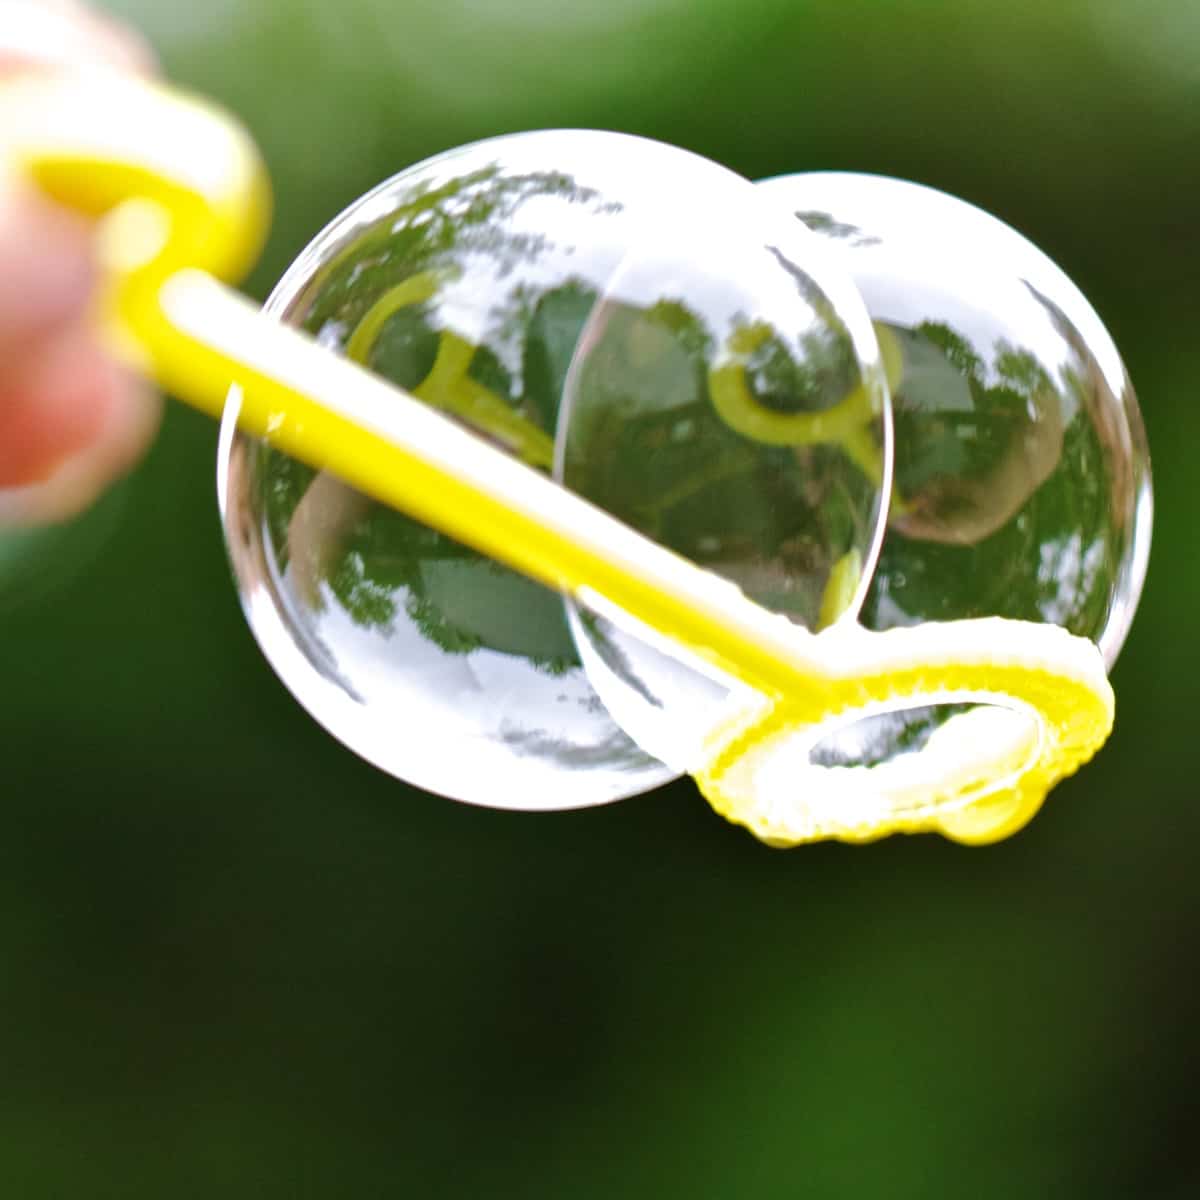 2 homemade bubbles on a yellow wand